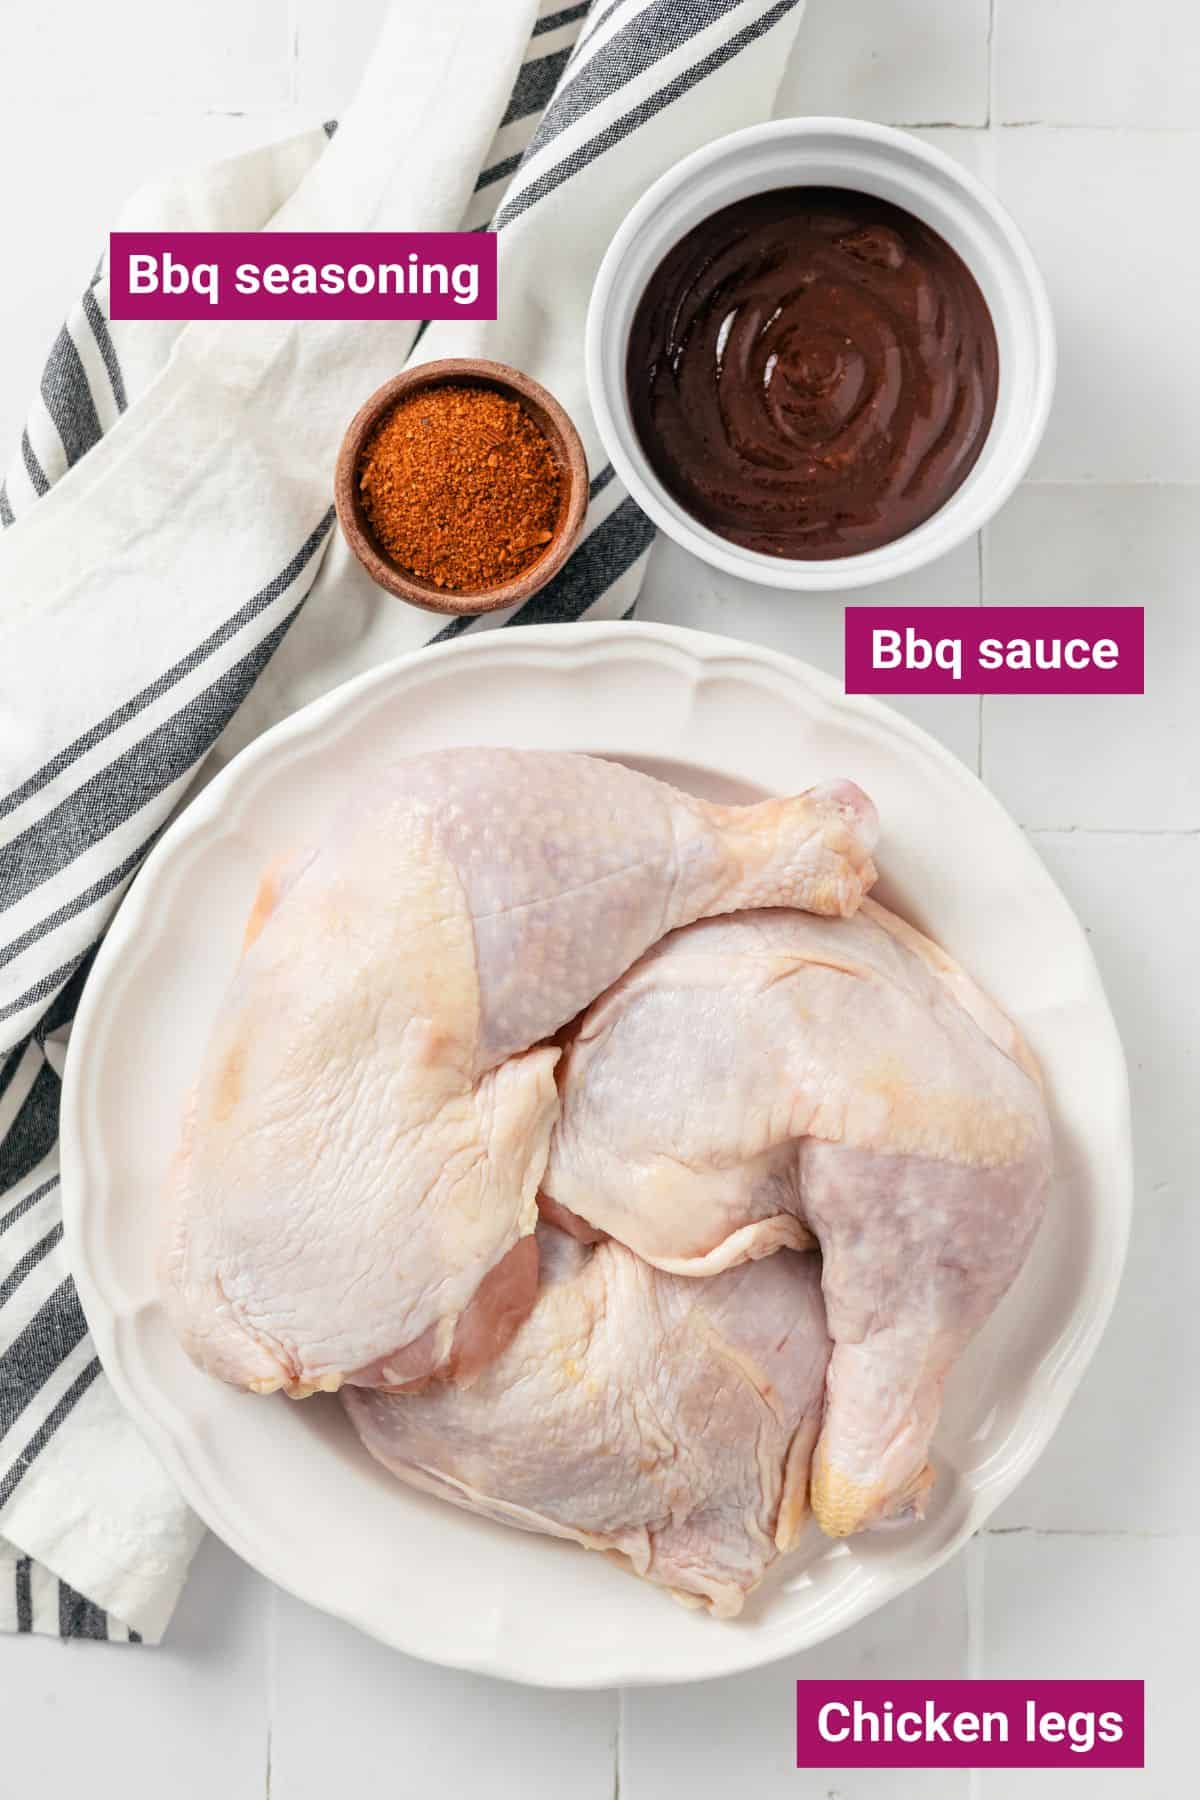 Ingredients for BBQ Chicken Quarters: Raw chicken leg quarters in one bowl, BBQ seasoning in another, and a bowl of BBQ sauce, set up for a flavorful and easy slow-cooking preparation.